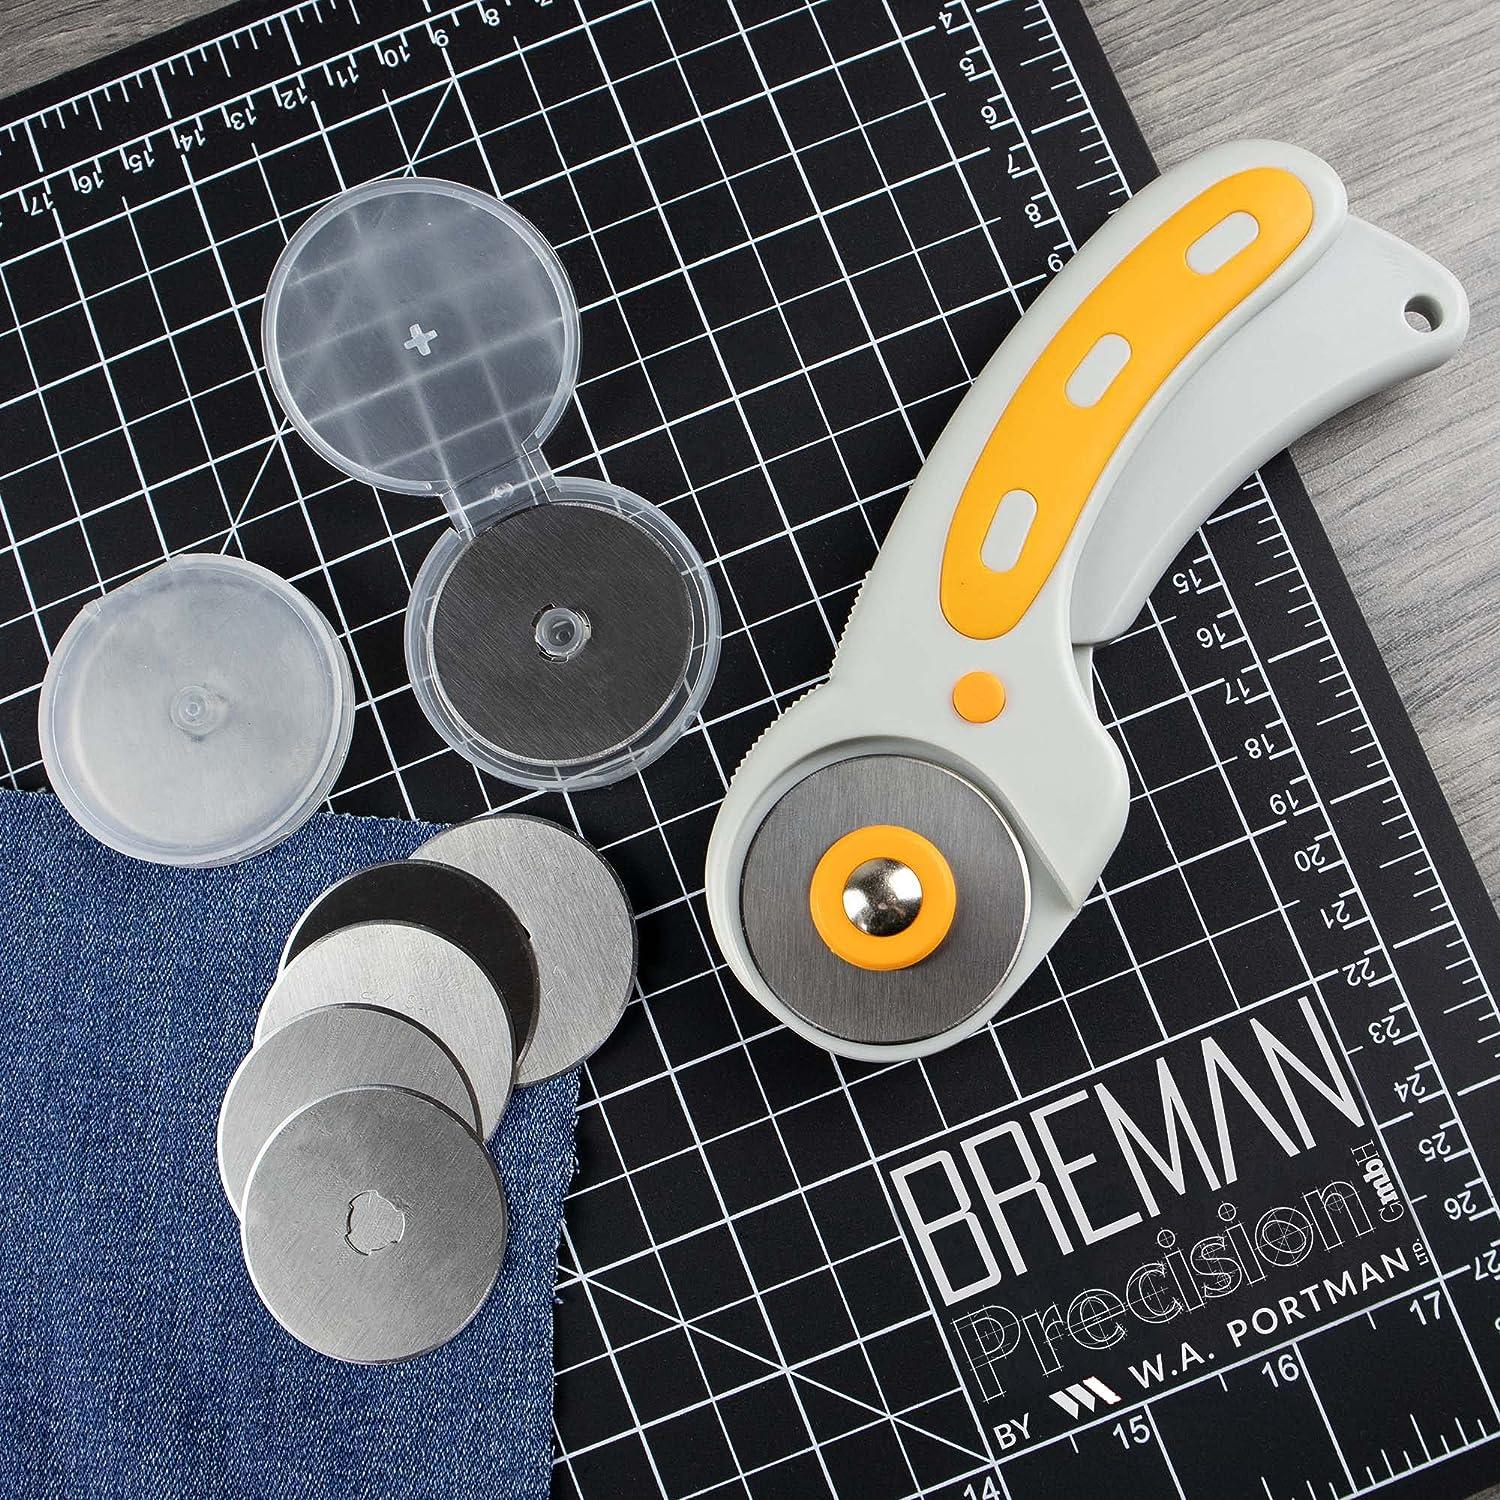 WA Portman Rotary Cutter Set with Blades - 45mm Rotary Cutter with Safety  Lock - 5 Extra SKS-7 Steel Rotary Fabric Cutter Blades - Fabric Cutter  Wheel for Sewing - Fabric Rotary Cutter Blades 45mm